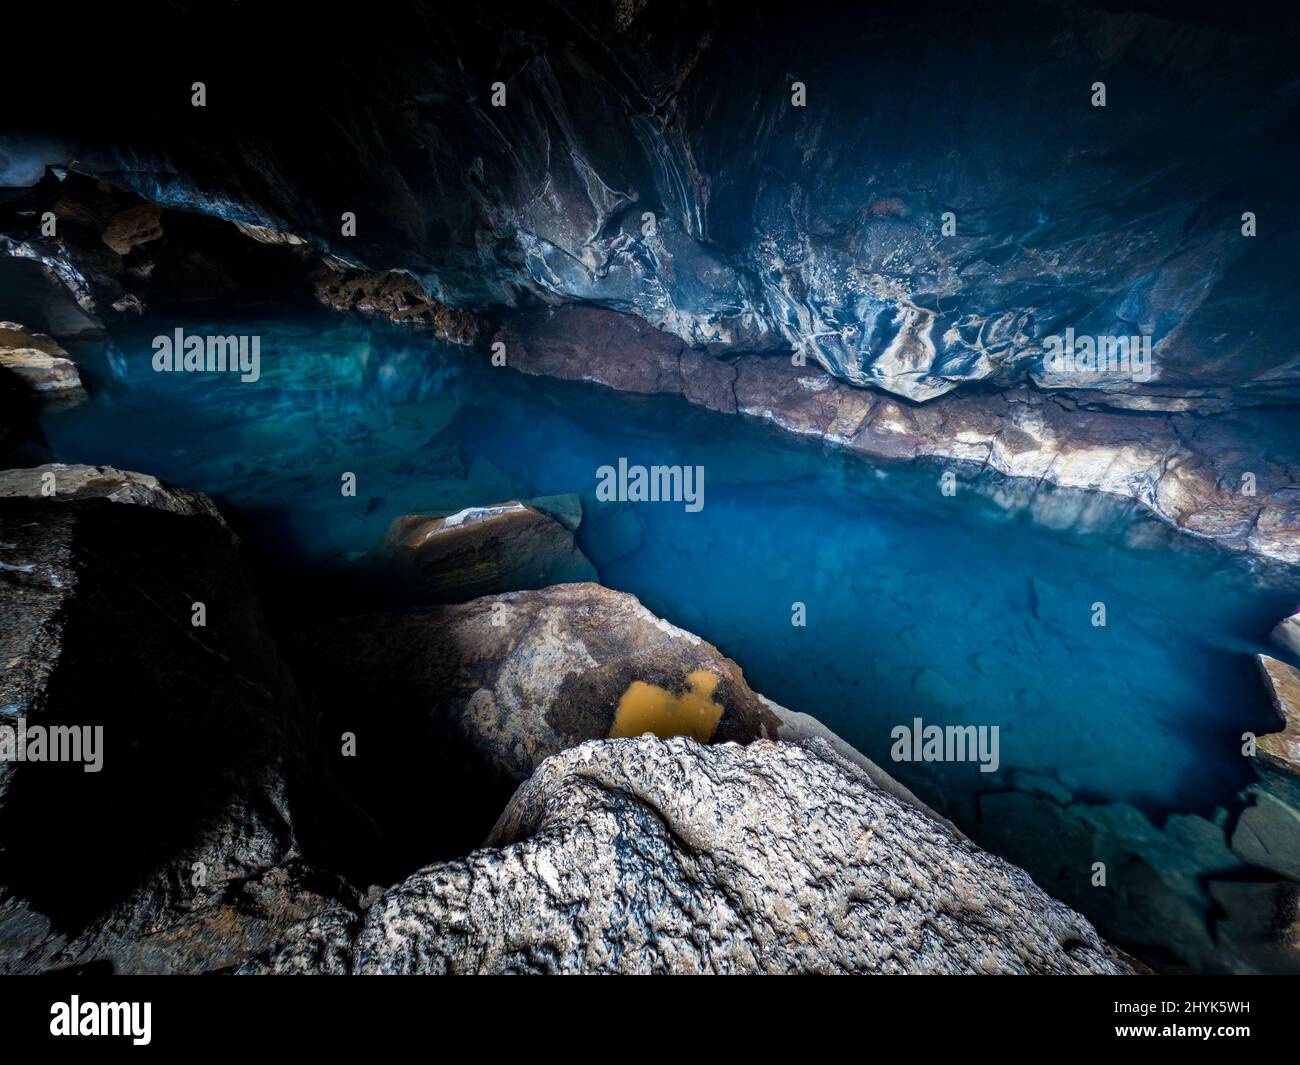 Deep blue waters of Grjotagja Cave in Iceland Stock Photo